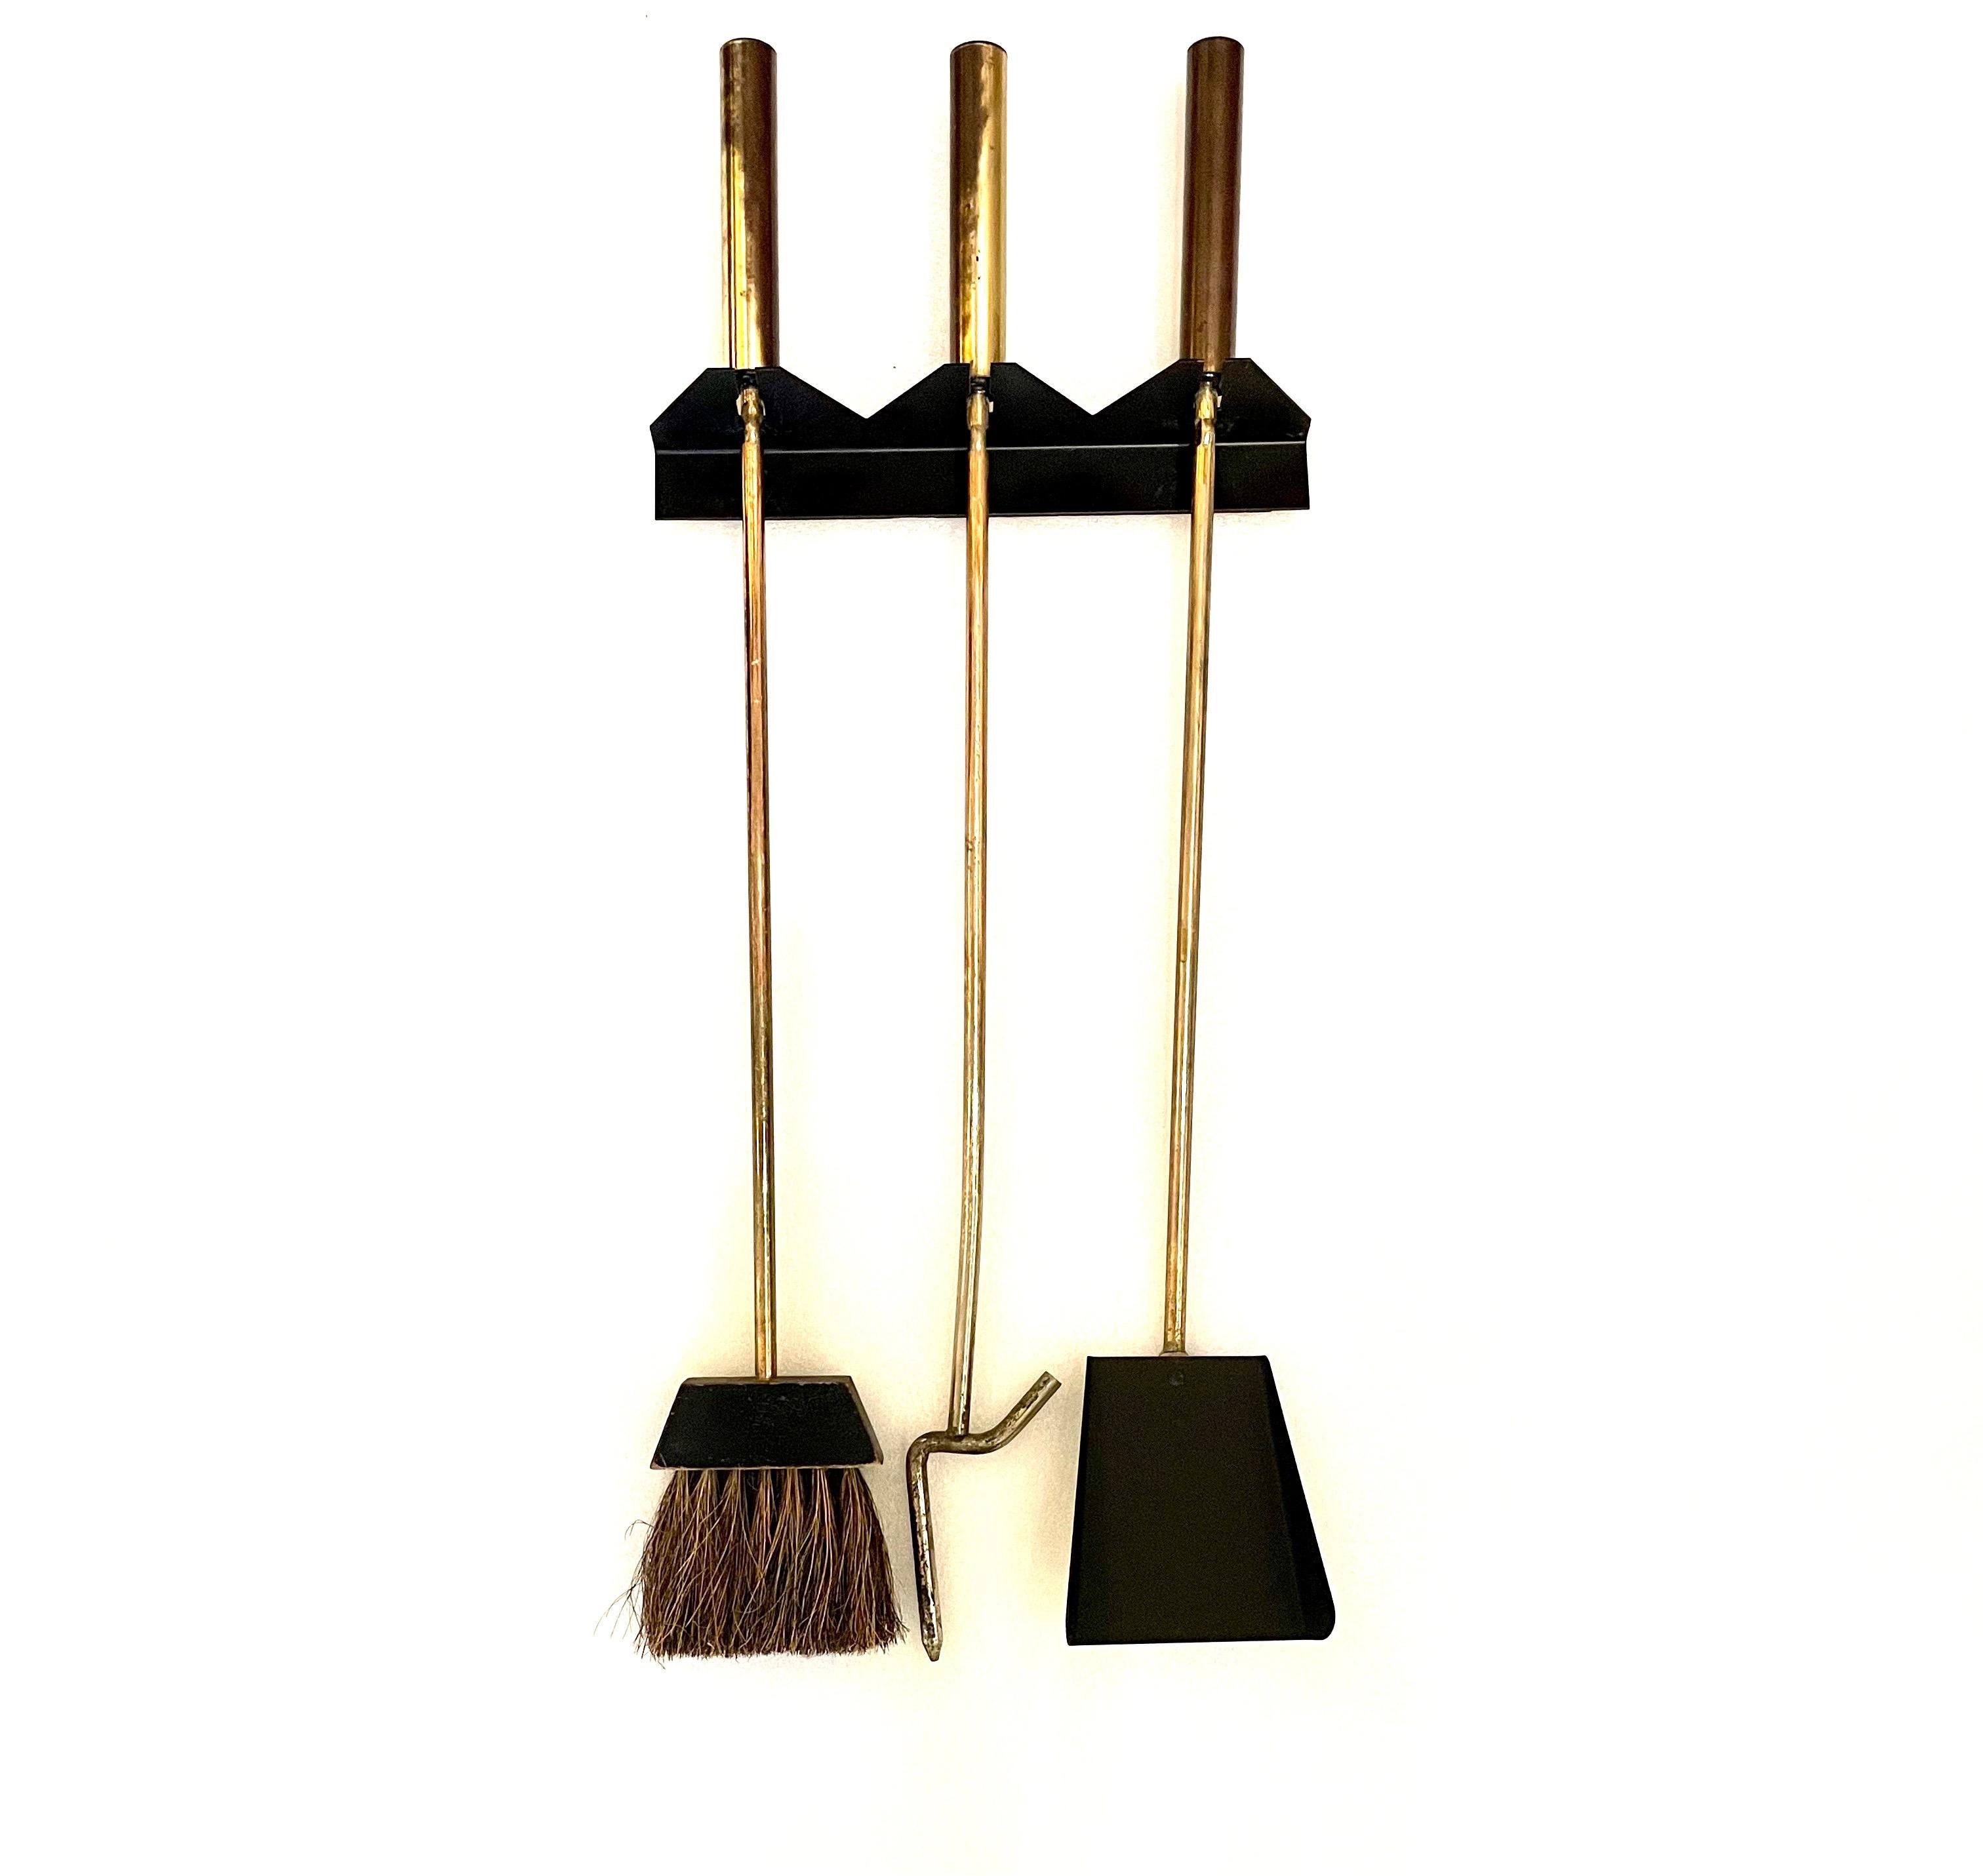 American Mid Century Atomic Age Patinated Brass Wall Mounted Fireplace Tools Set In Fair Condition For Sale In San Diego, CA